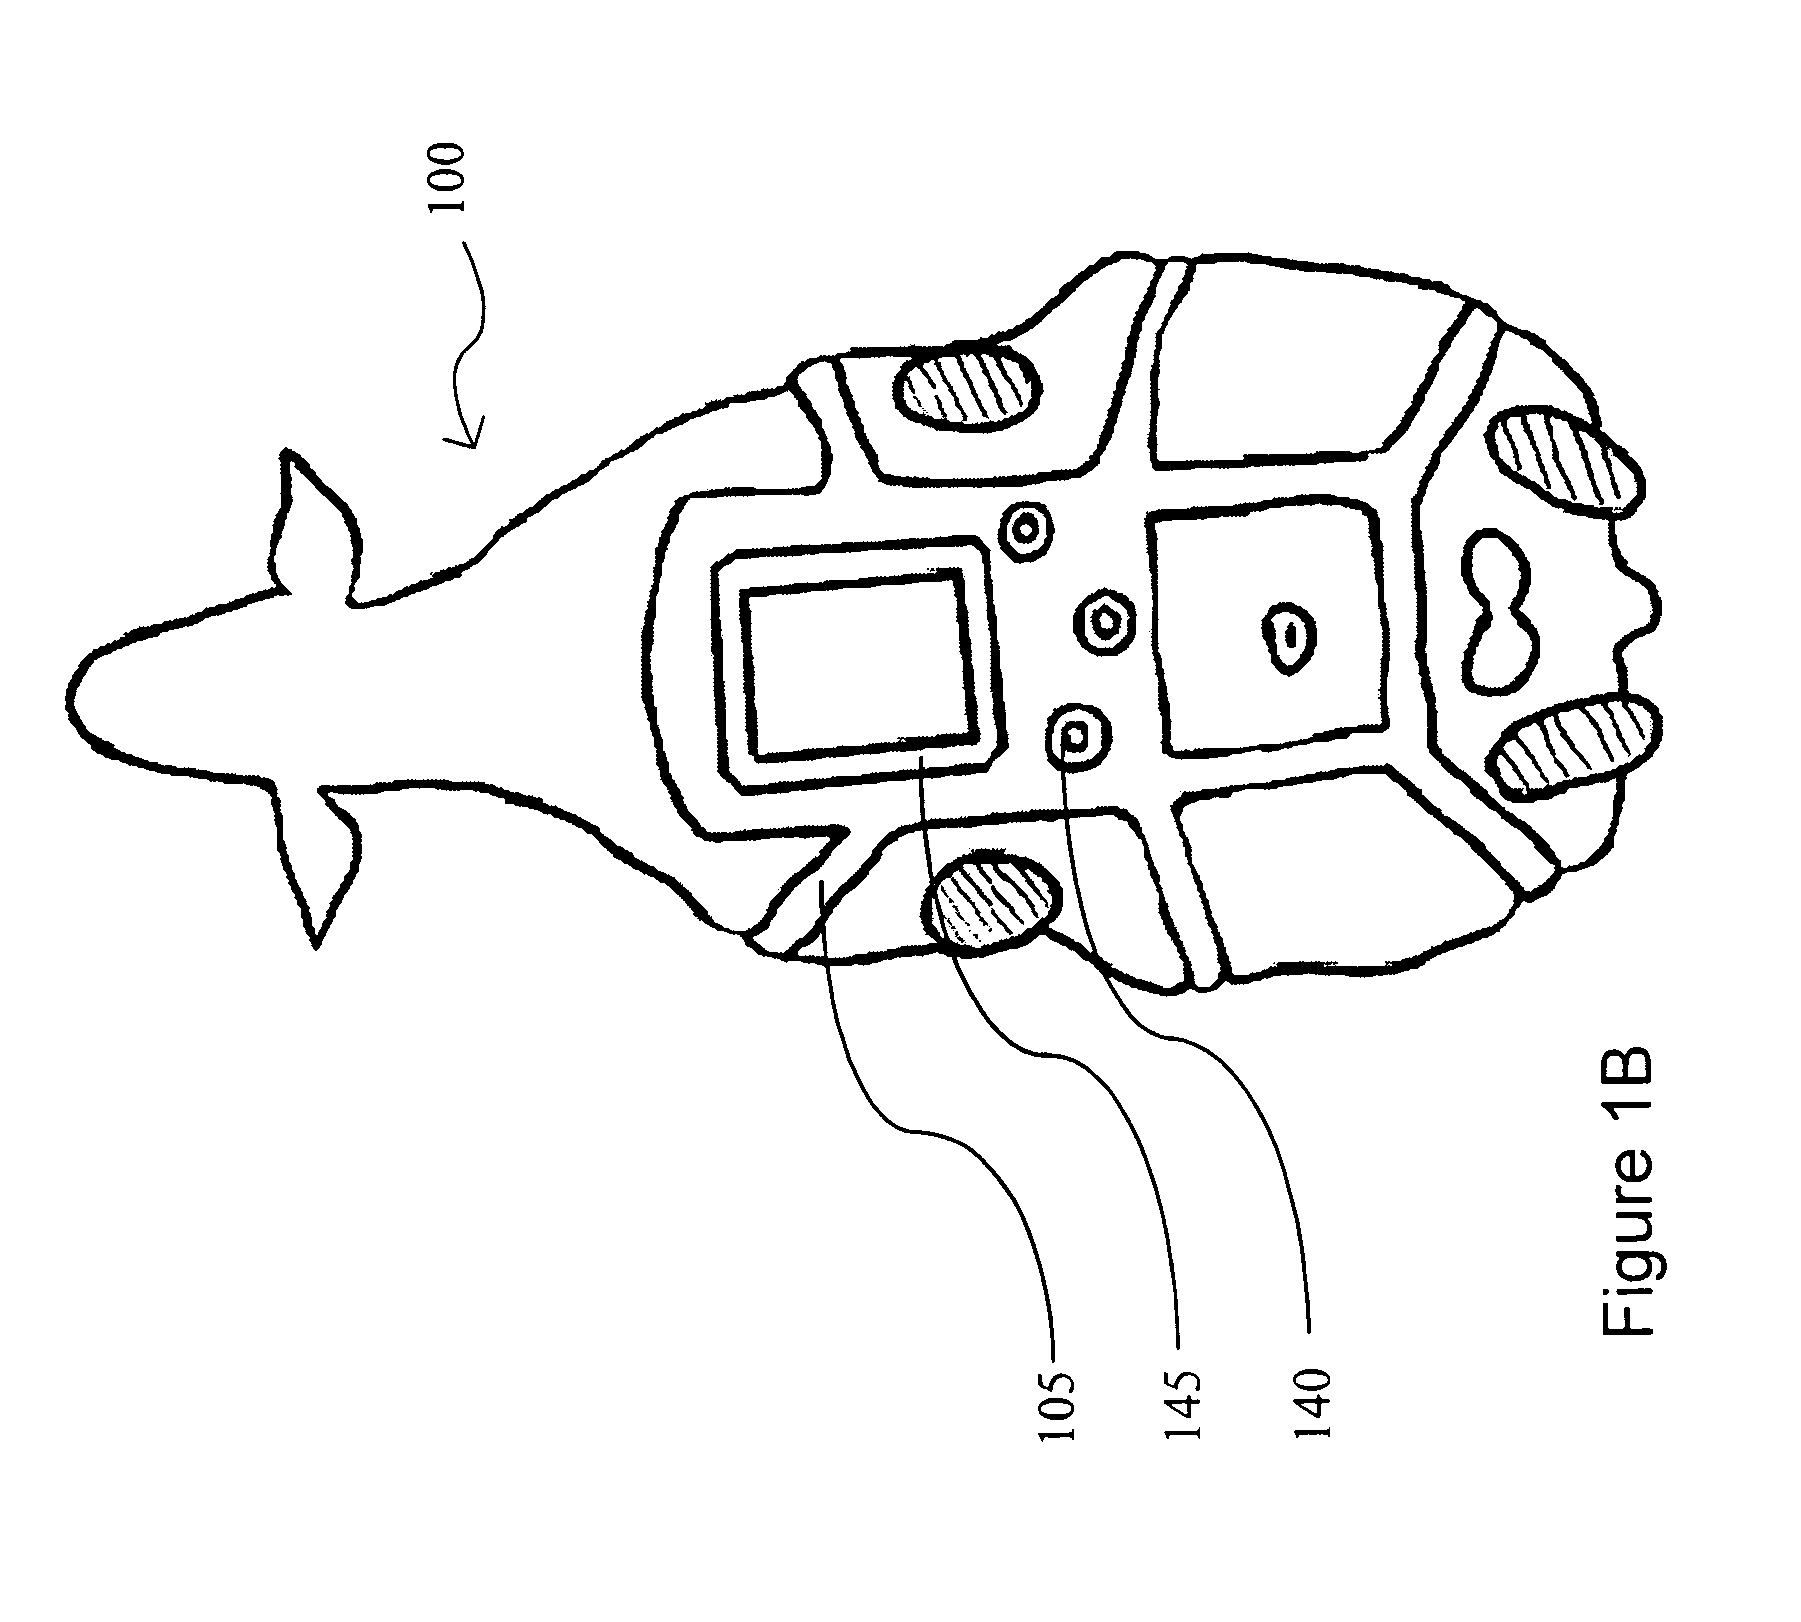 Method and Device for Automatically Detecting Mating of Animals